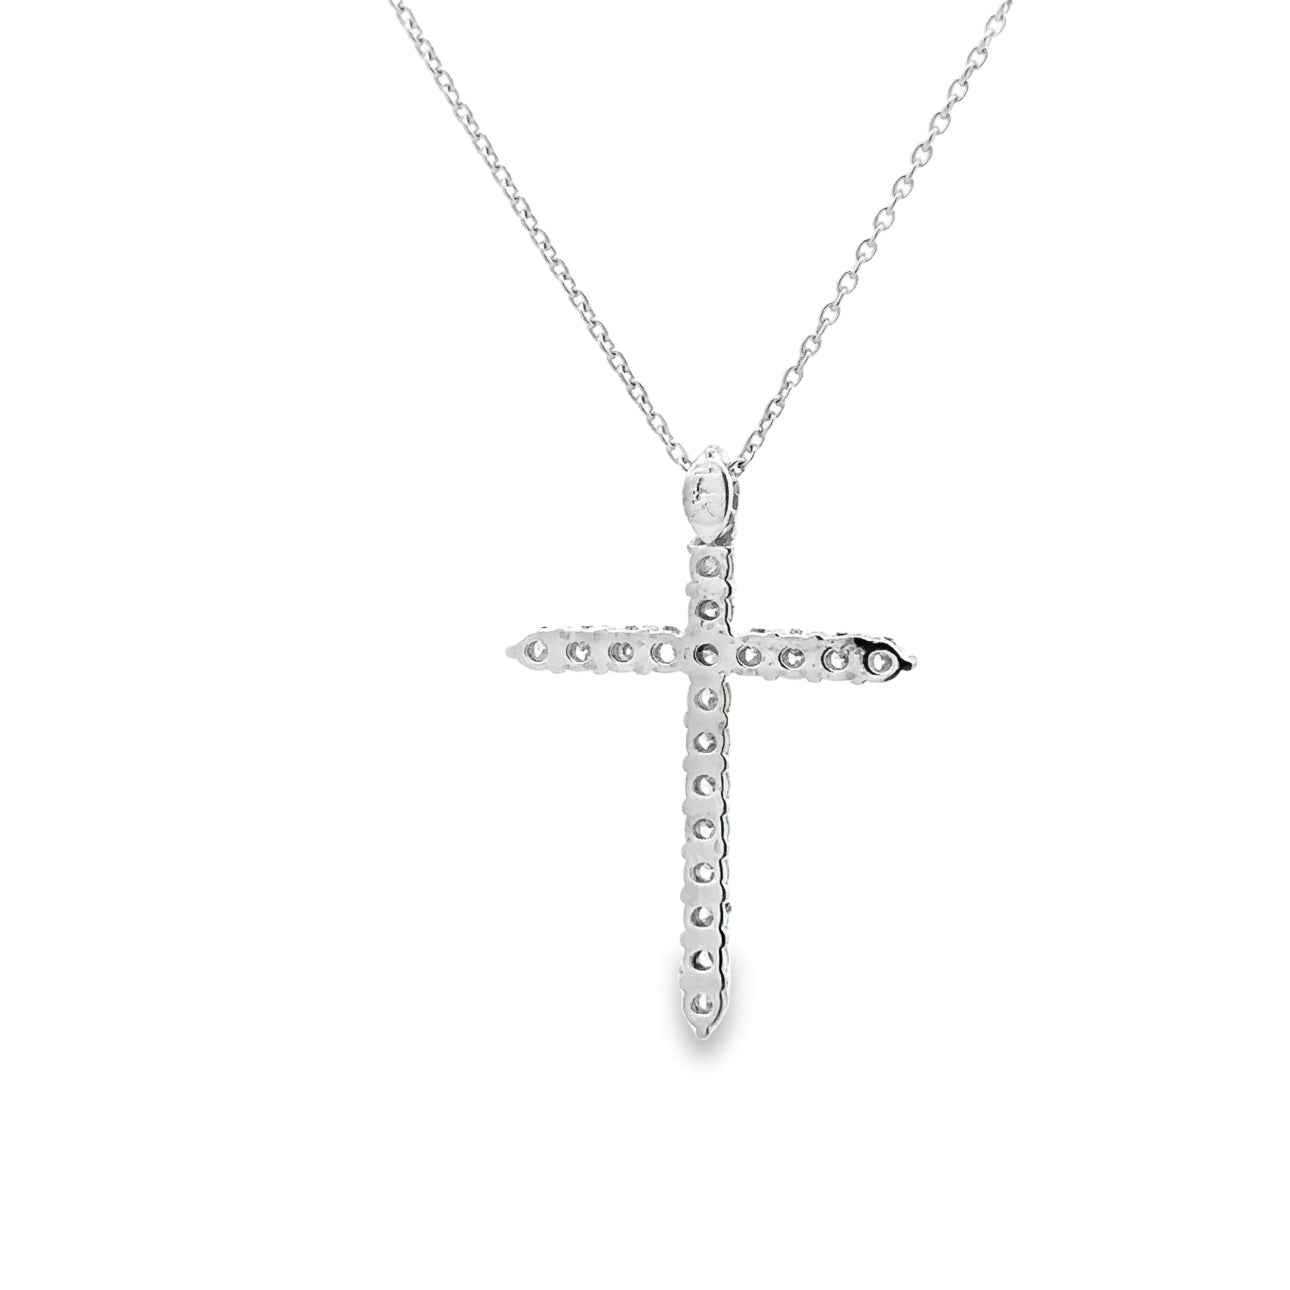 WD1321 White Gold and Diamond Cross Necklace